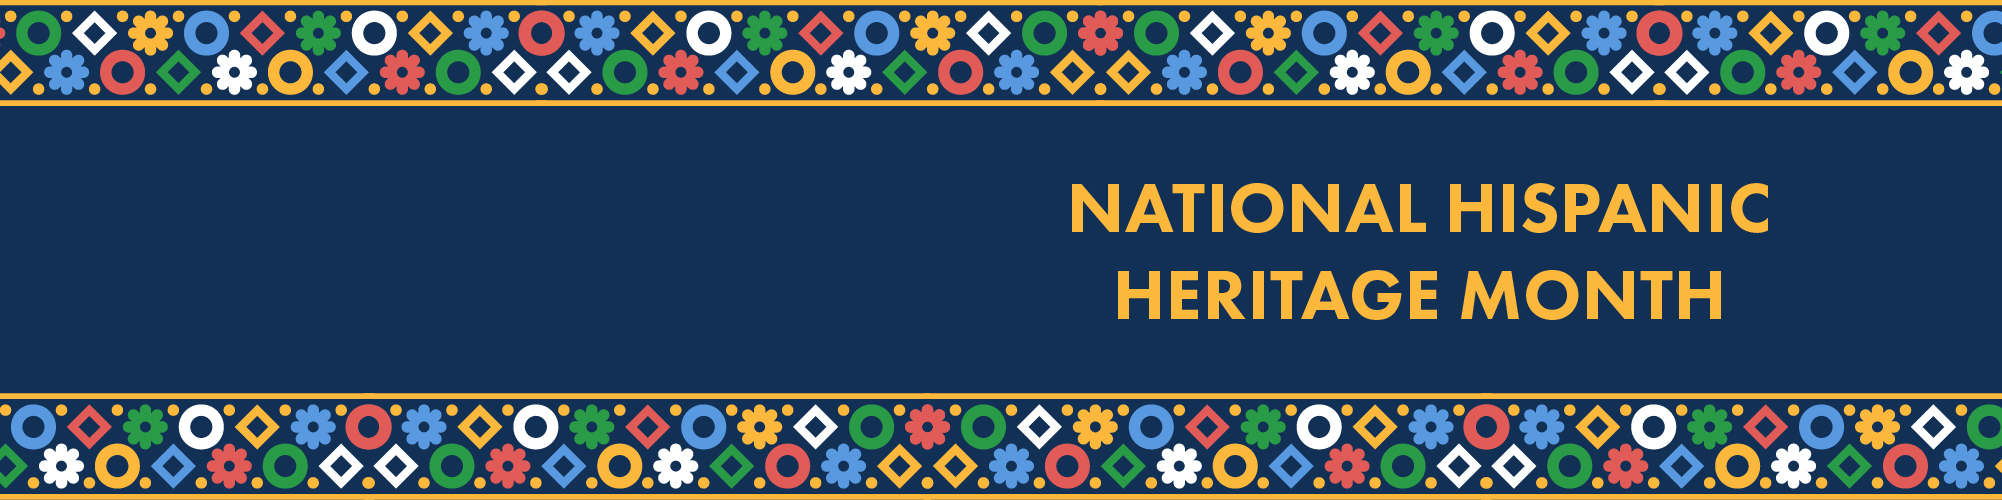 A graphic with a blue background, and a decorative outline with flowers, diamonds, and circles, in blue, yellow, red and green. The text reads “National Hispanic Heritage Month”.